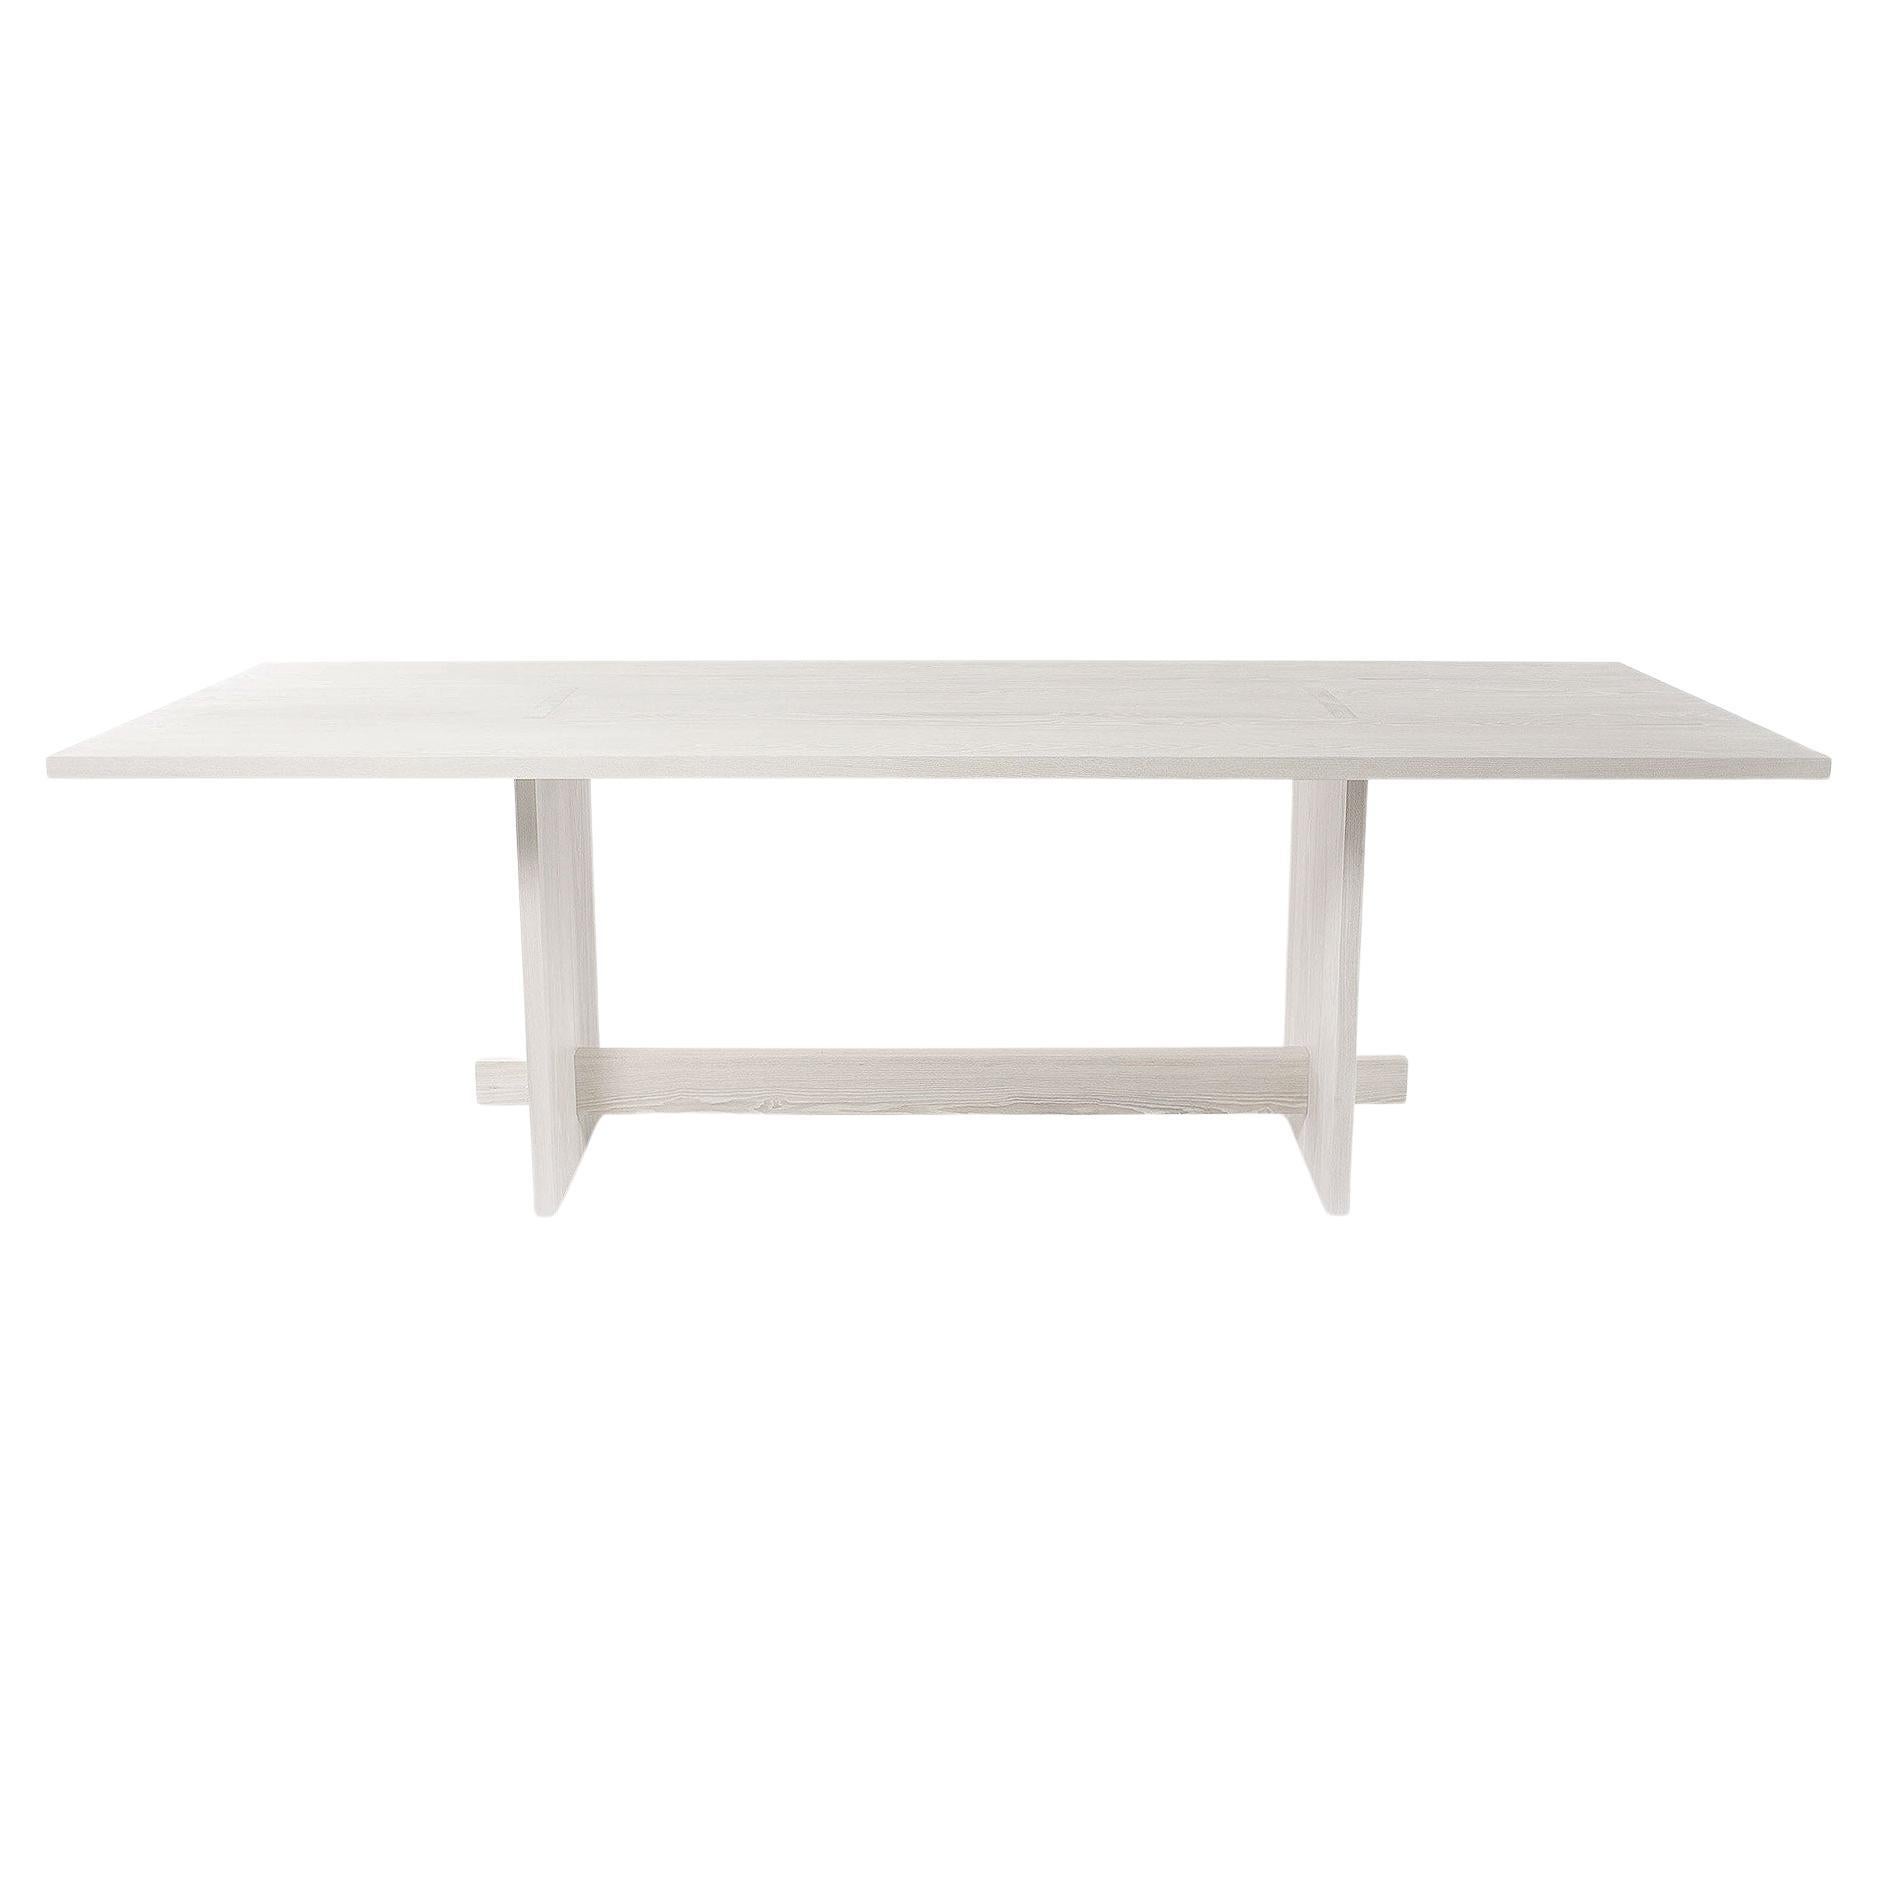 Handcrafted Solid White Ash Himes Dining Table 84"L by Mary Ratcliffe Studio For Sale